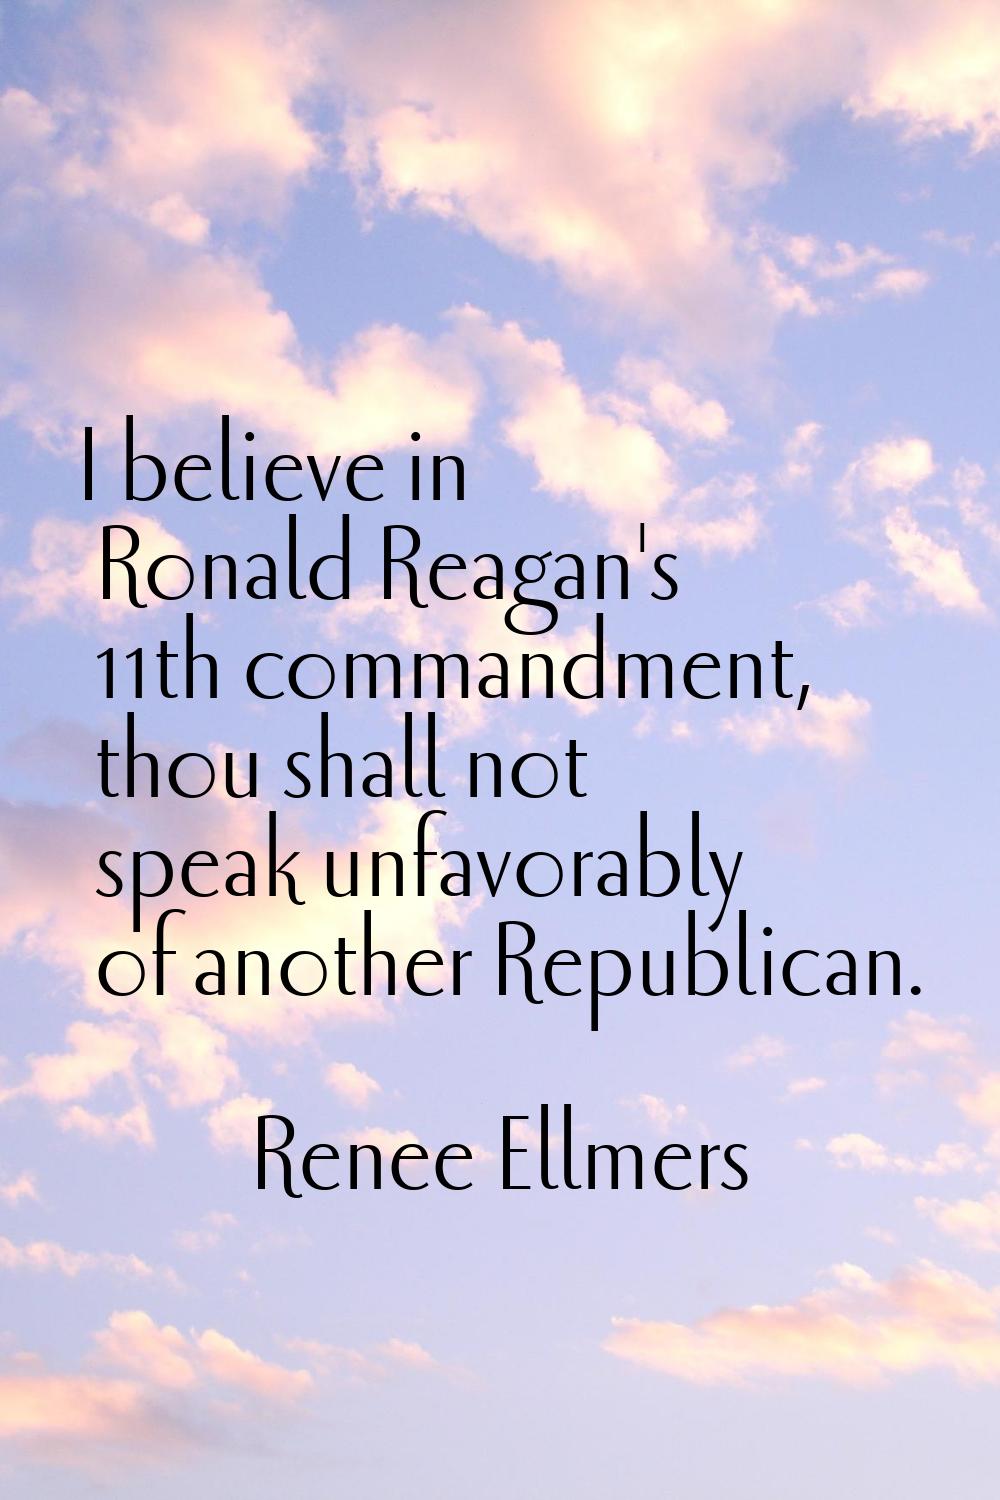 I believe in Ronald Reagan's 11th commandment, thou shall not speak unfavorably of another Republic